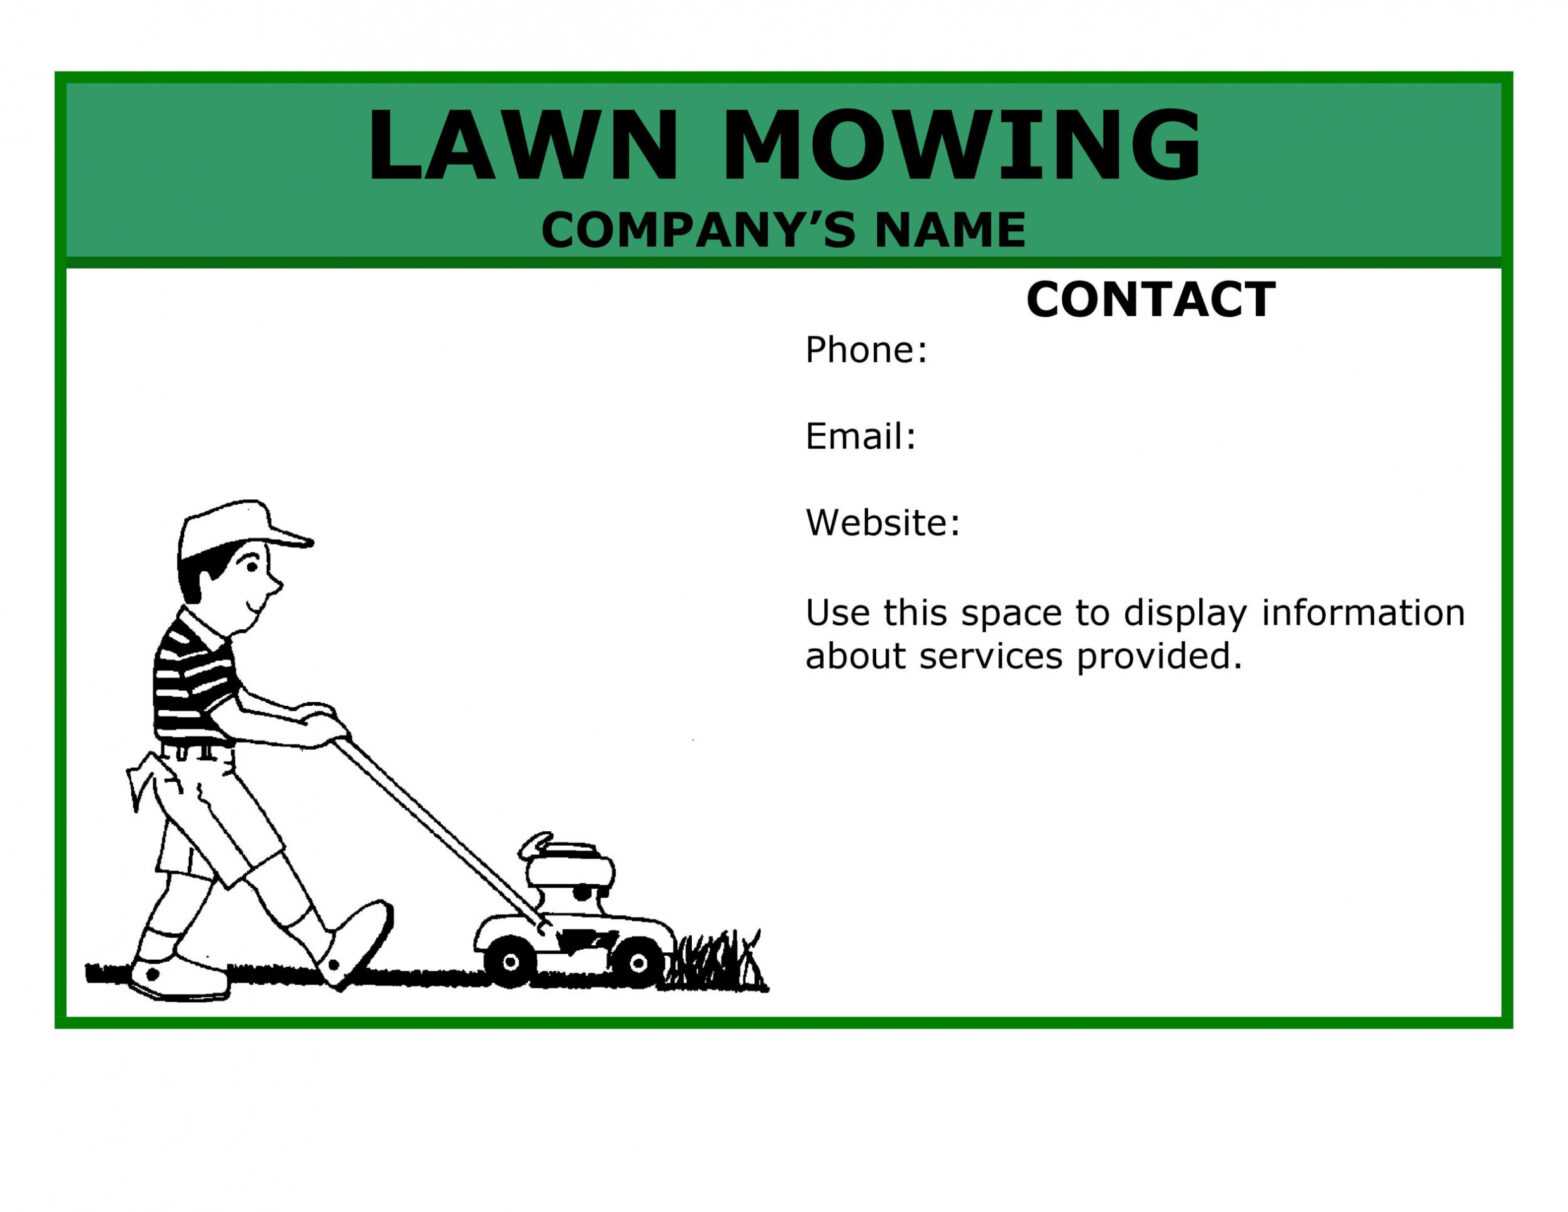 30 Free Lawn Care Flyer Templates [Lawn Mower Flyers] ᐅ inside Free Lawn Mowing Flyer Template